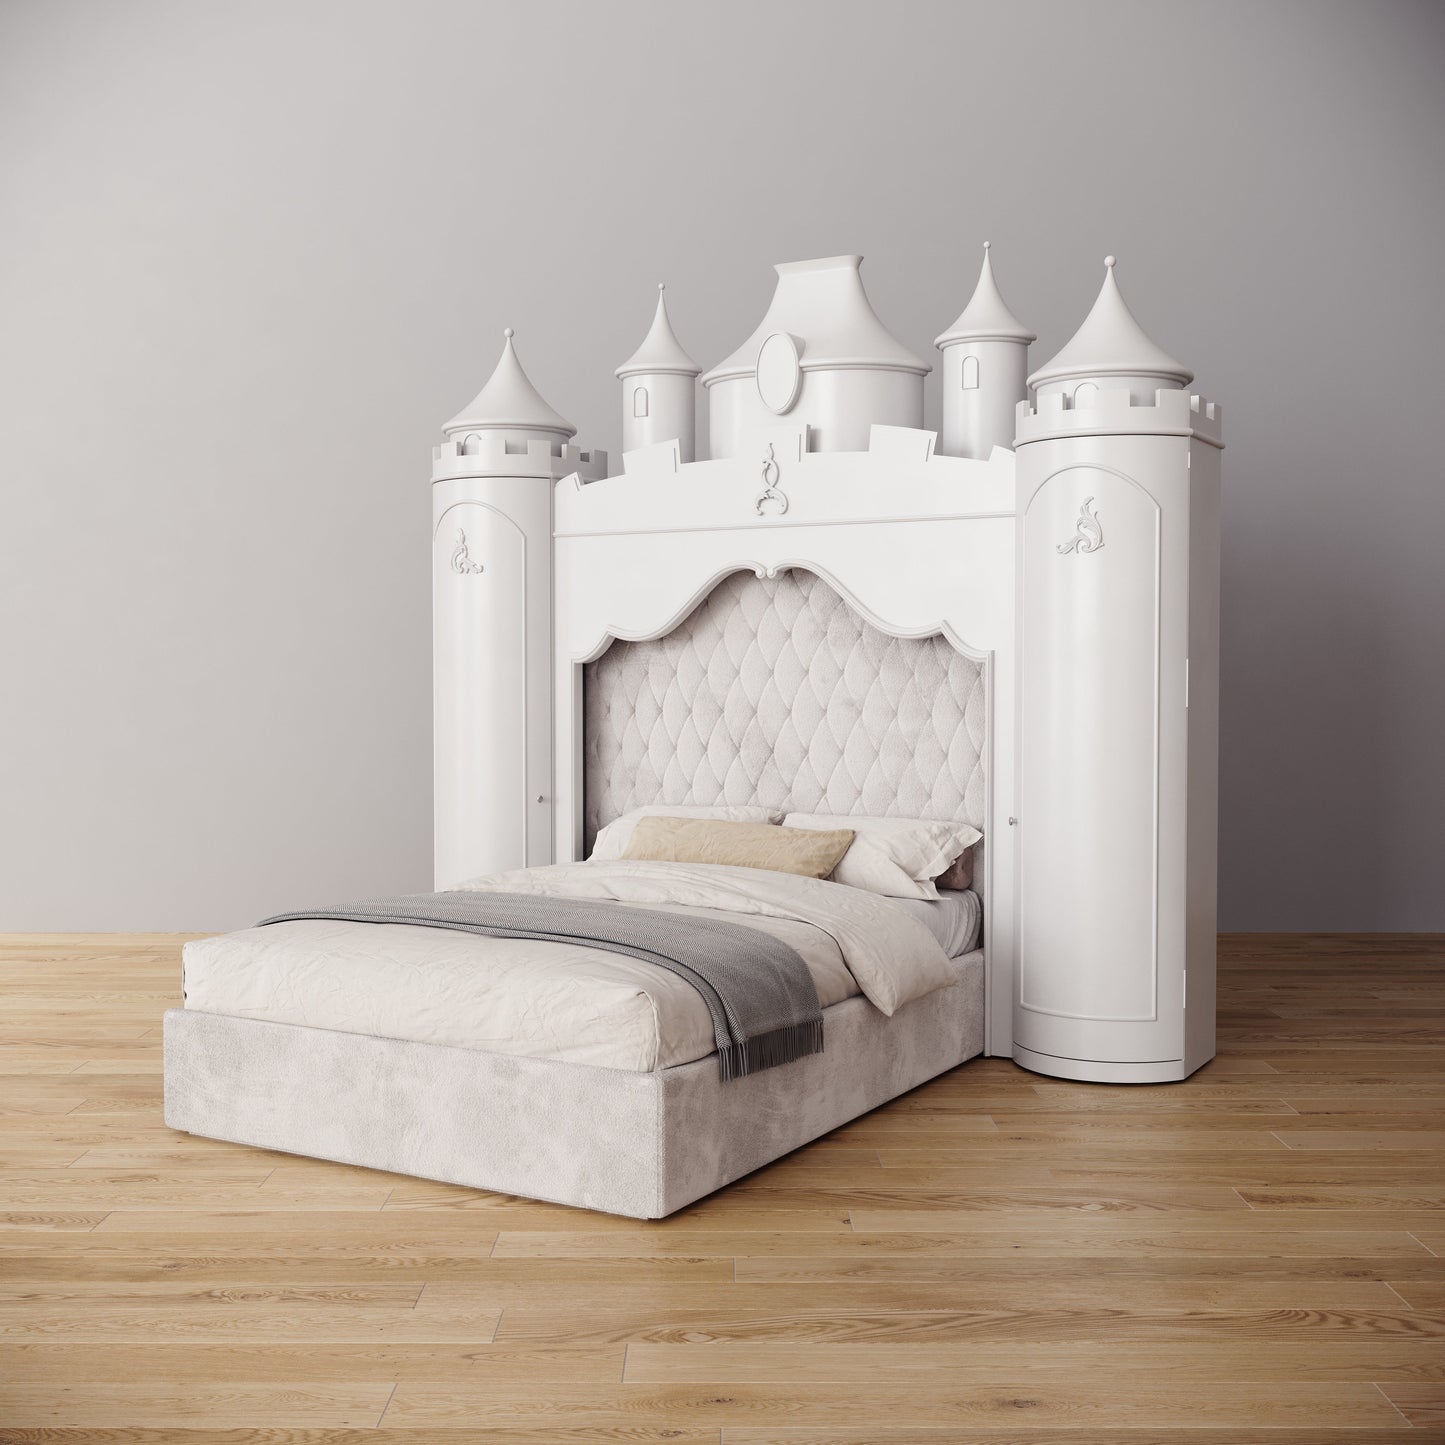 The Castle Headboad Bed